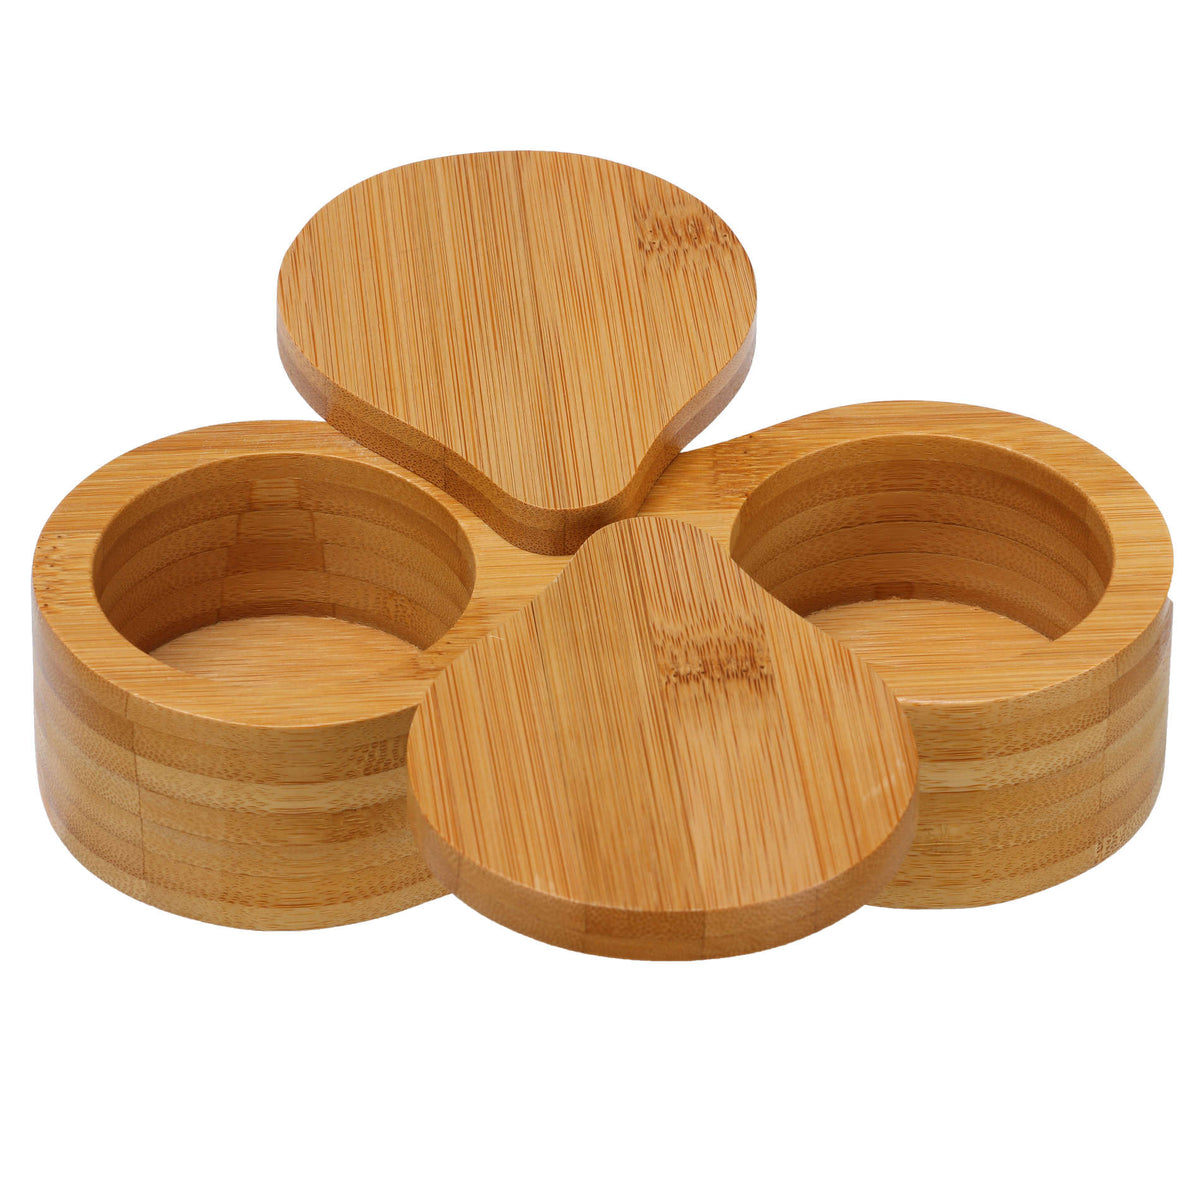 Cortesi Home Carol Natural Bamboo Salt and Pepper Herbs and Spice Box with Rotating Top